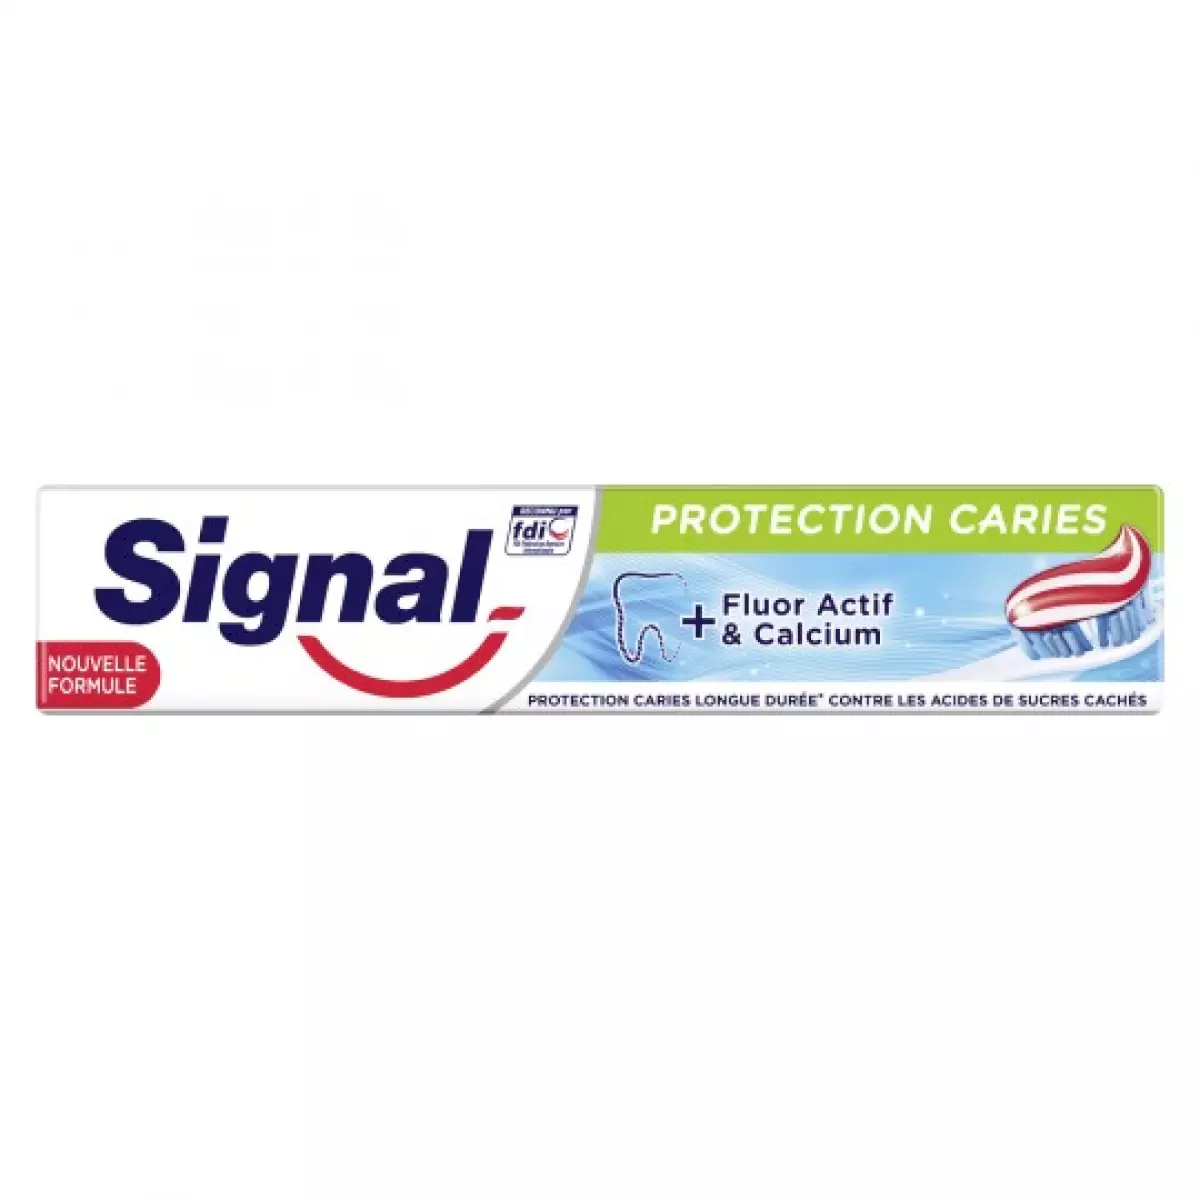 DENTIFRICE PROTECTION CARIES TUB 75 ML SIGNAL